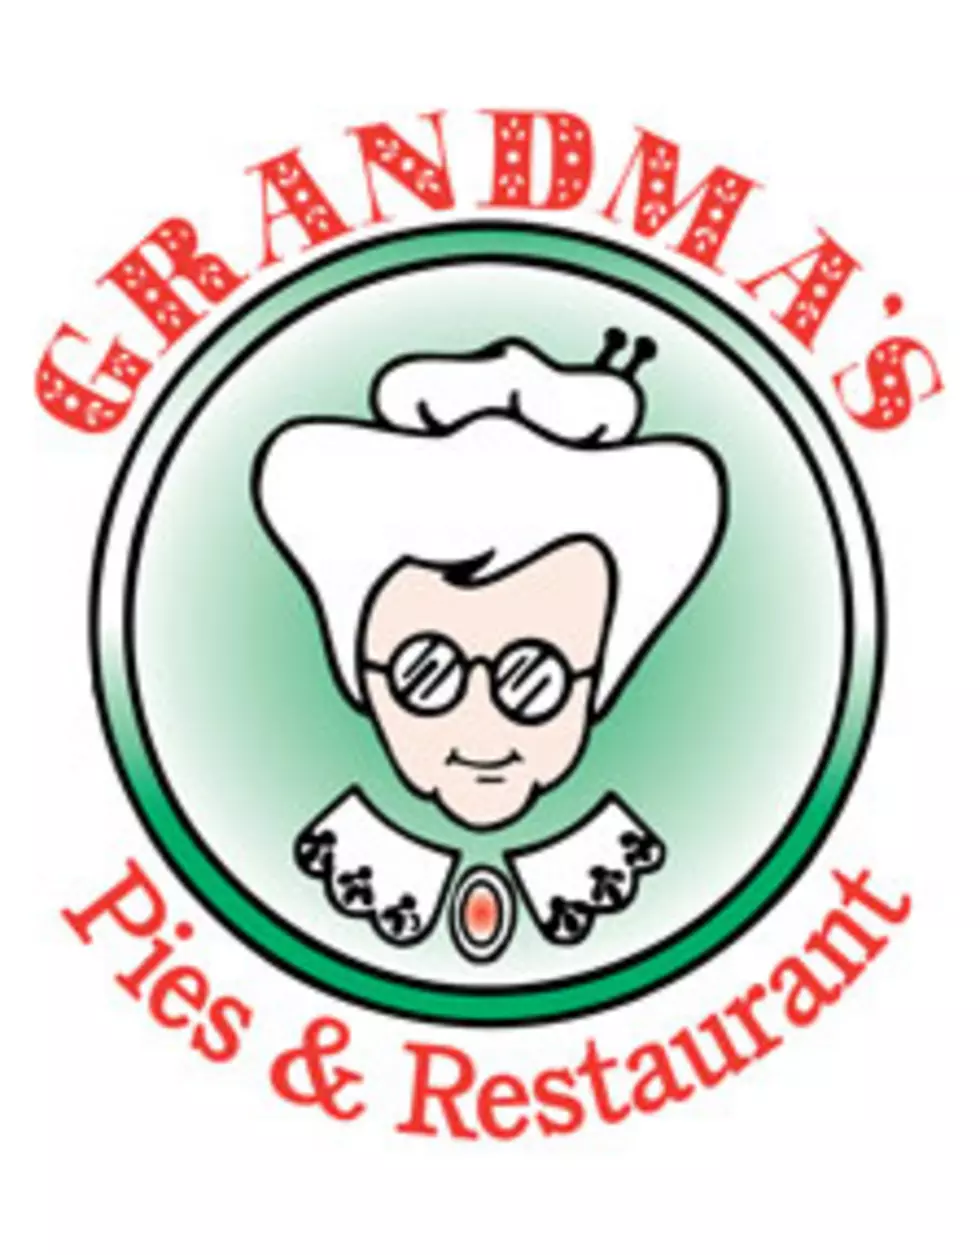 Is This The End Of Grandma’s Pies?